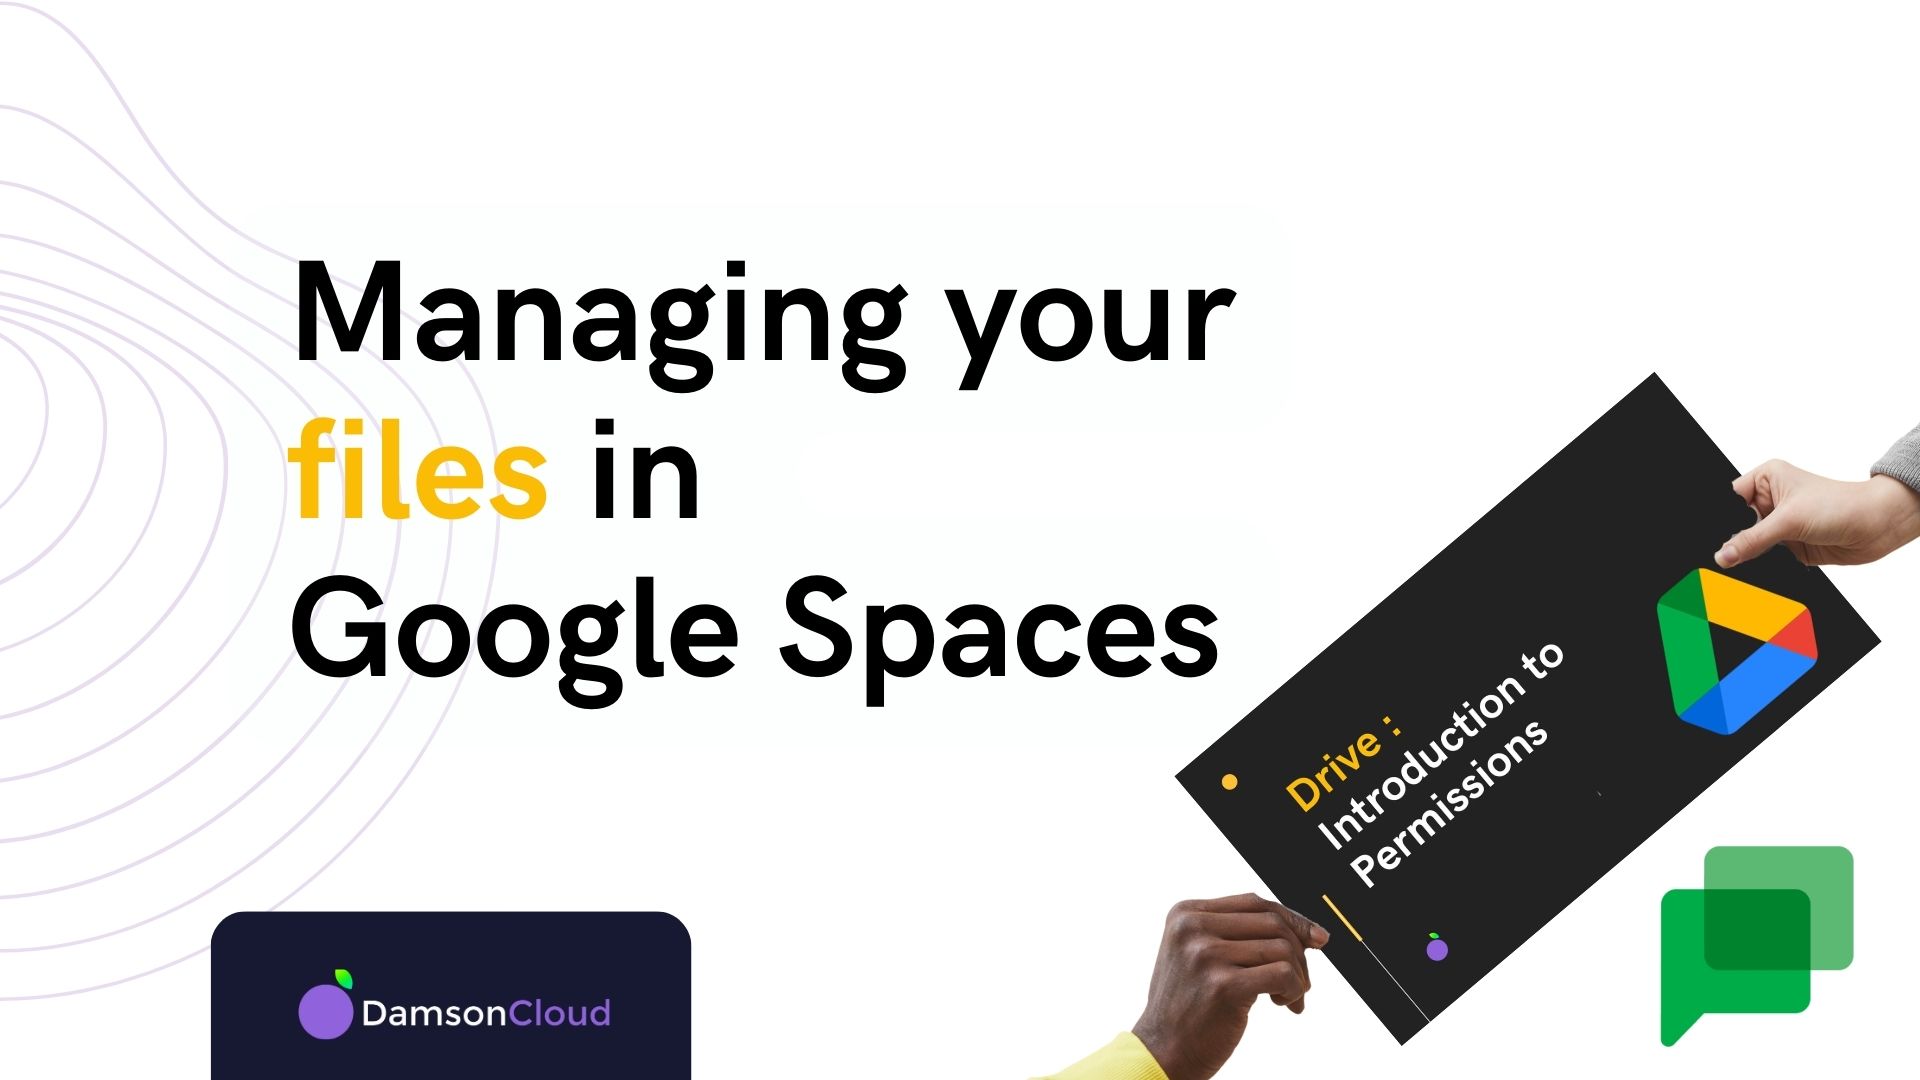 Managing your files in Google Spaces